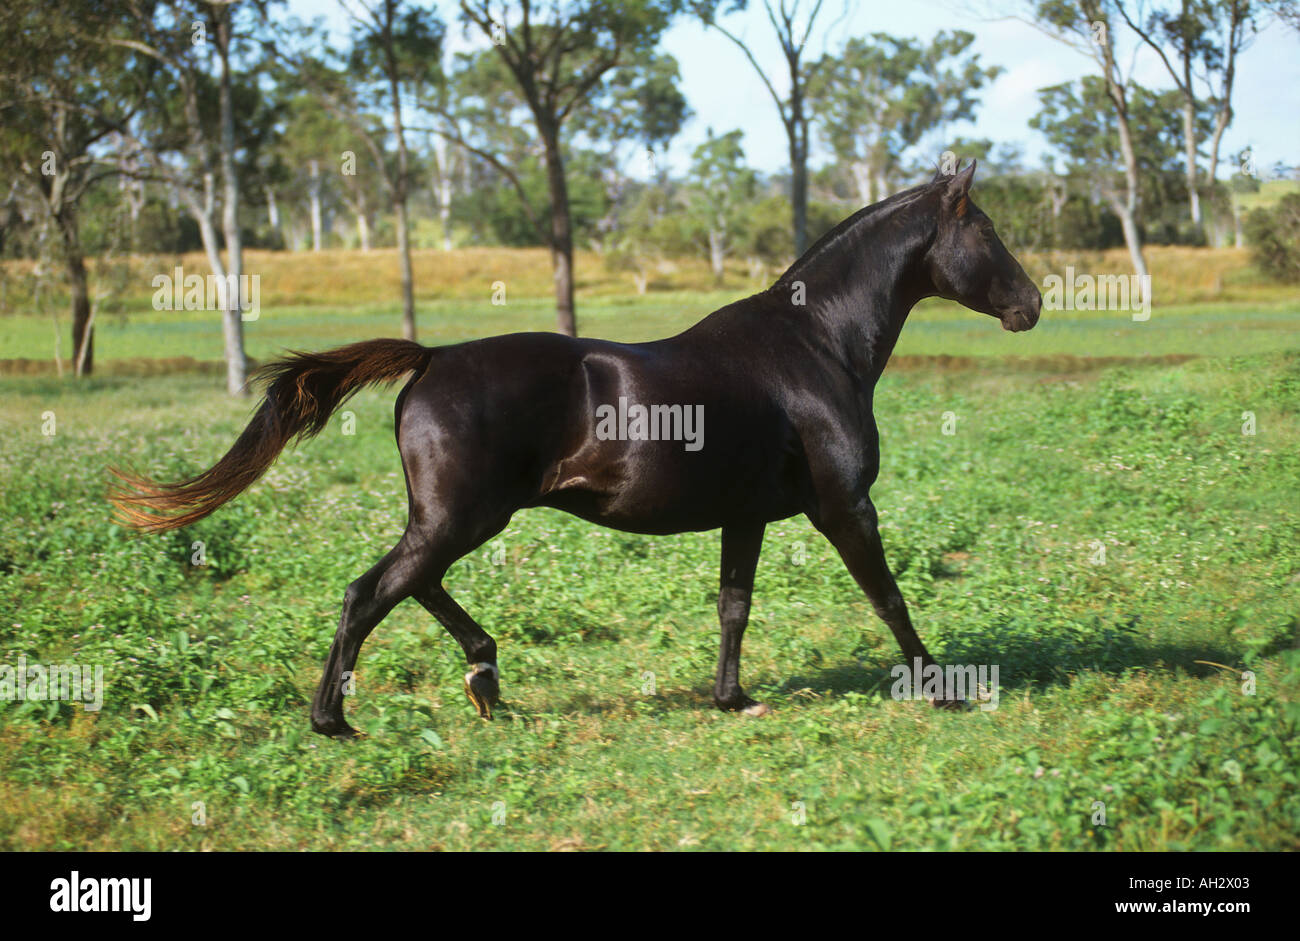 Australian Stock Horse - Walking on meadow Banque D'Images